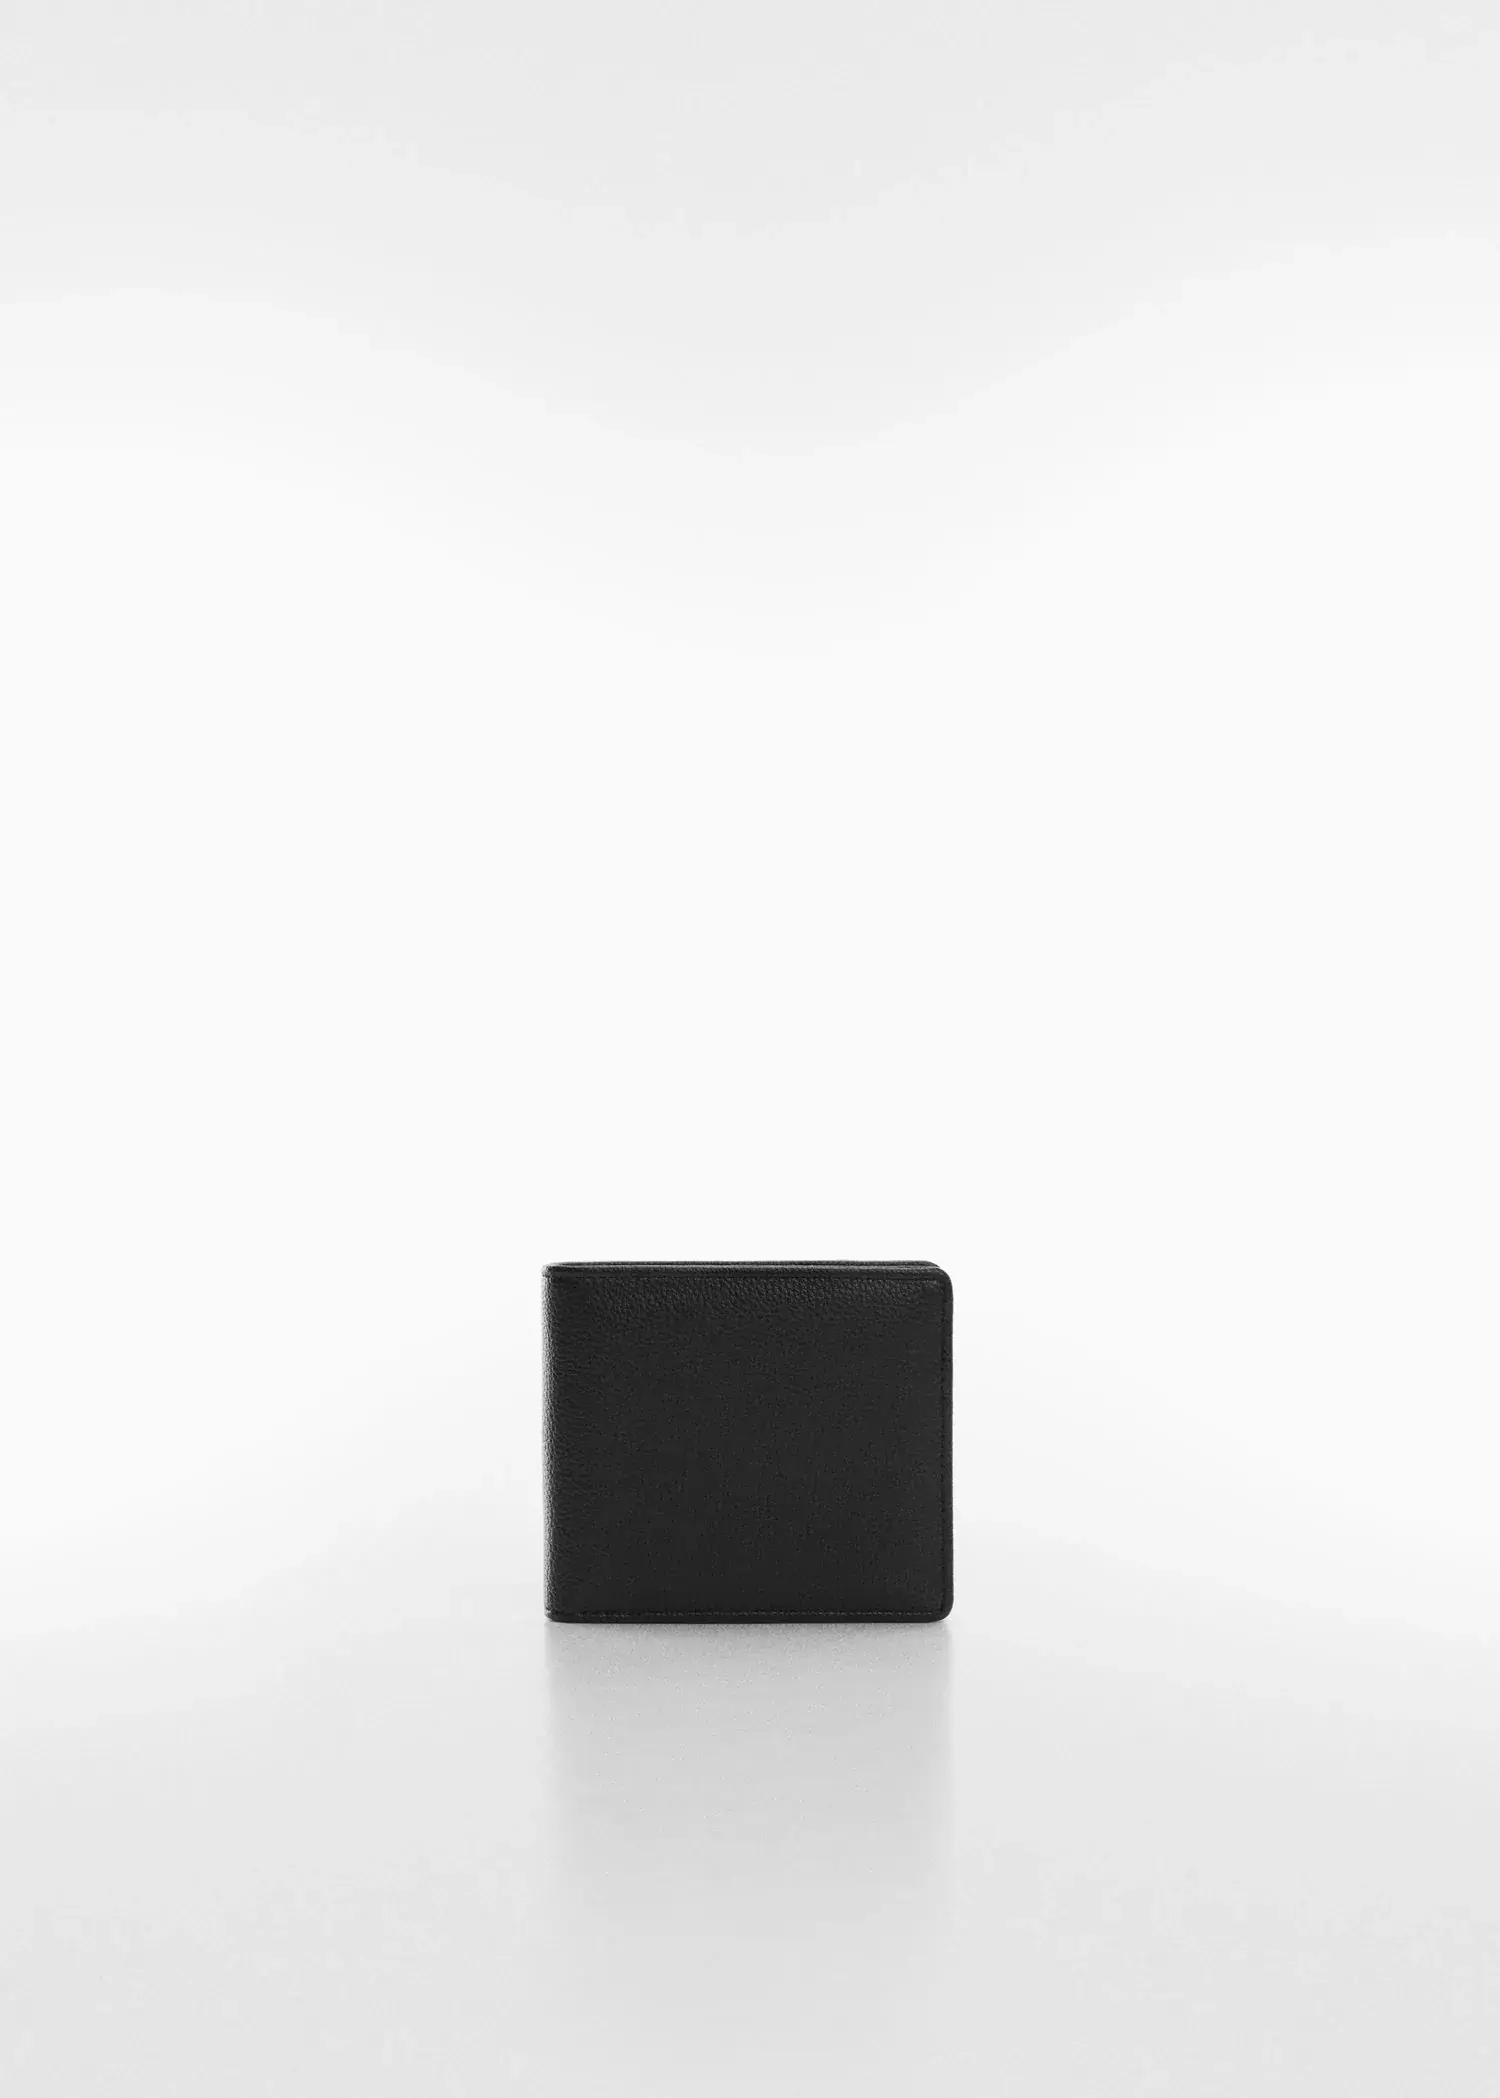 Mango Anti-contactless wallet. a black wallet sitting on top of a white table. 